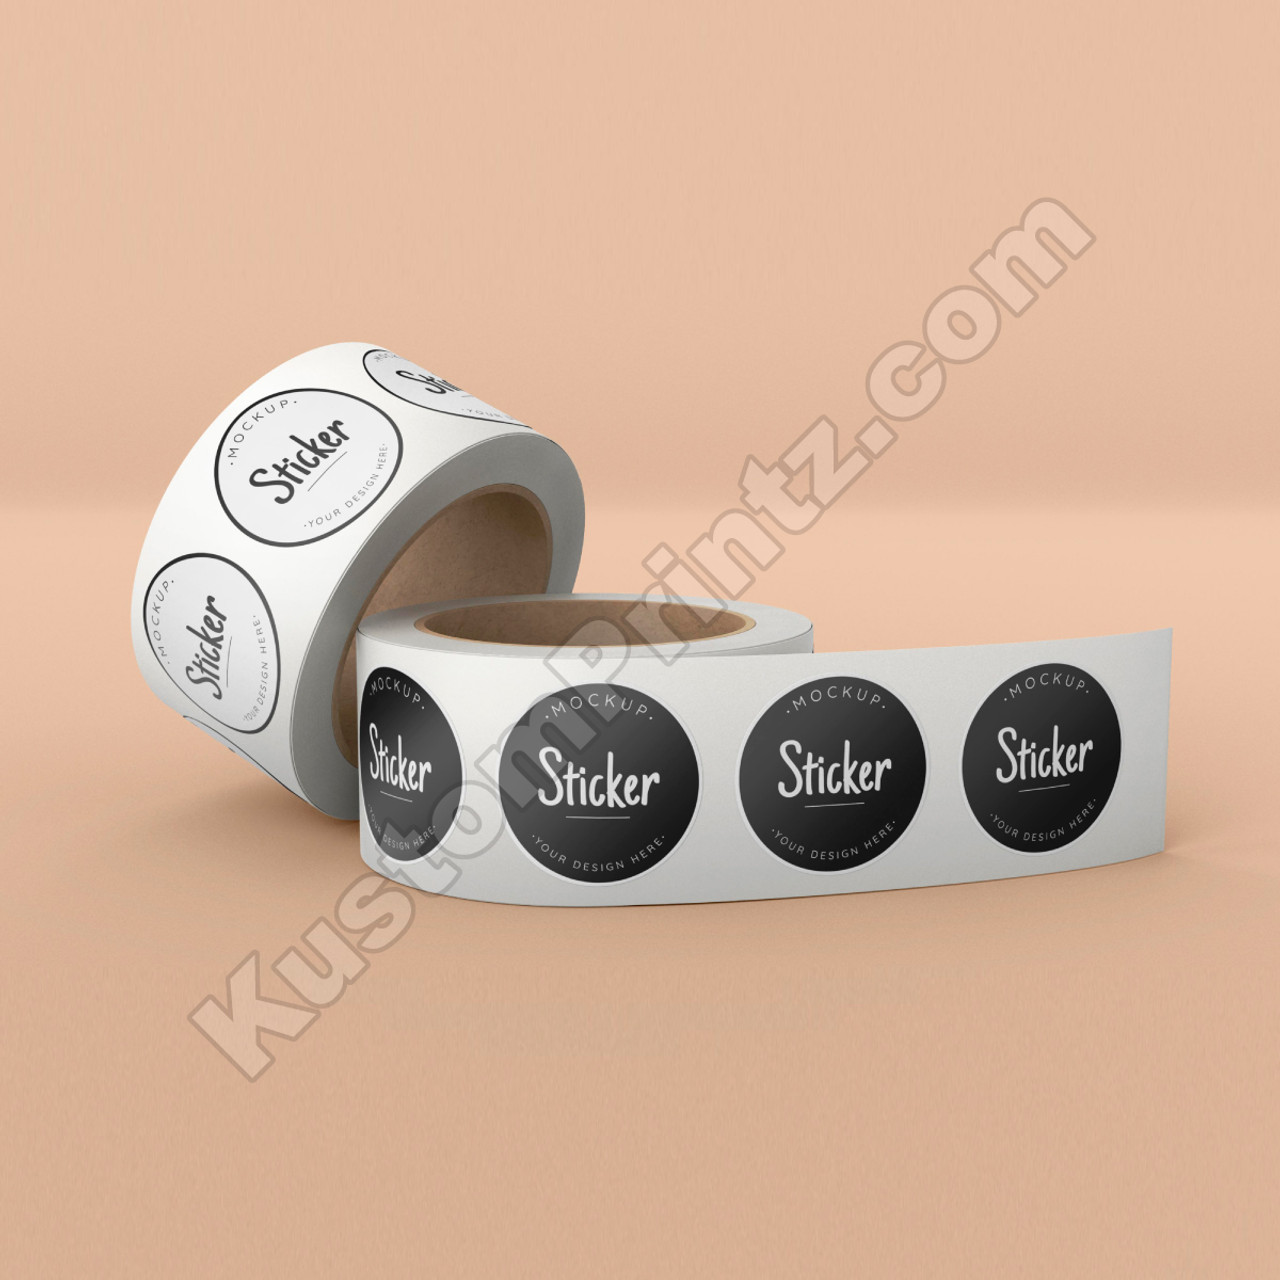 250 Roll Labels 3x3